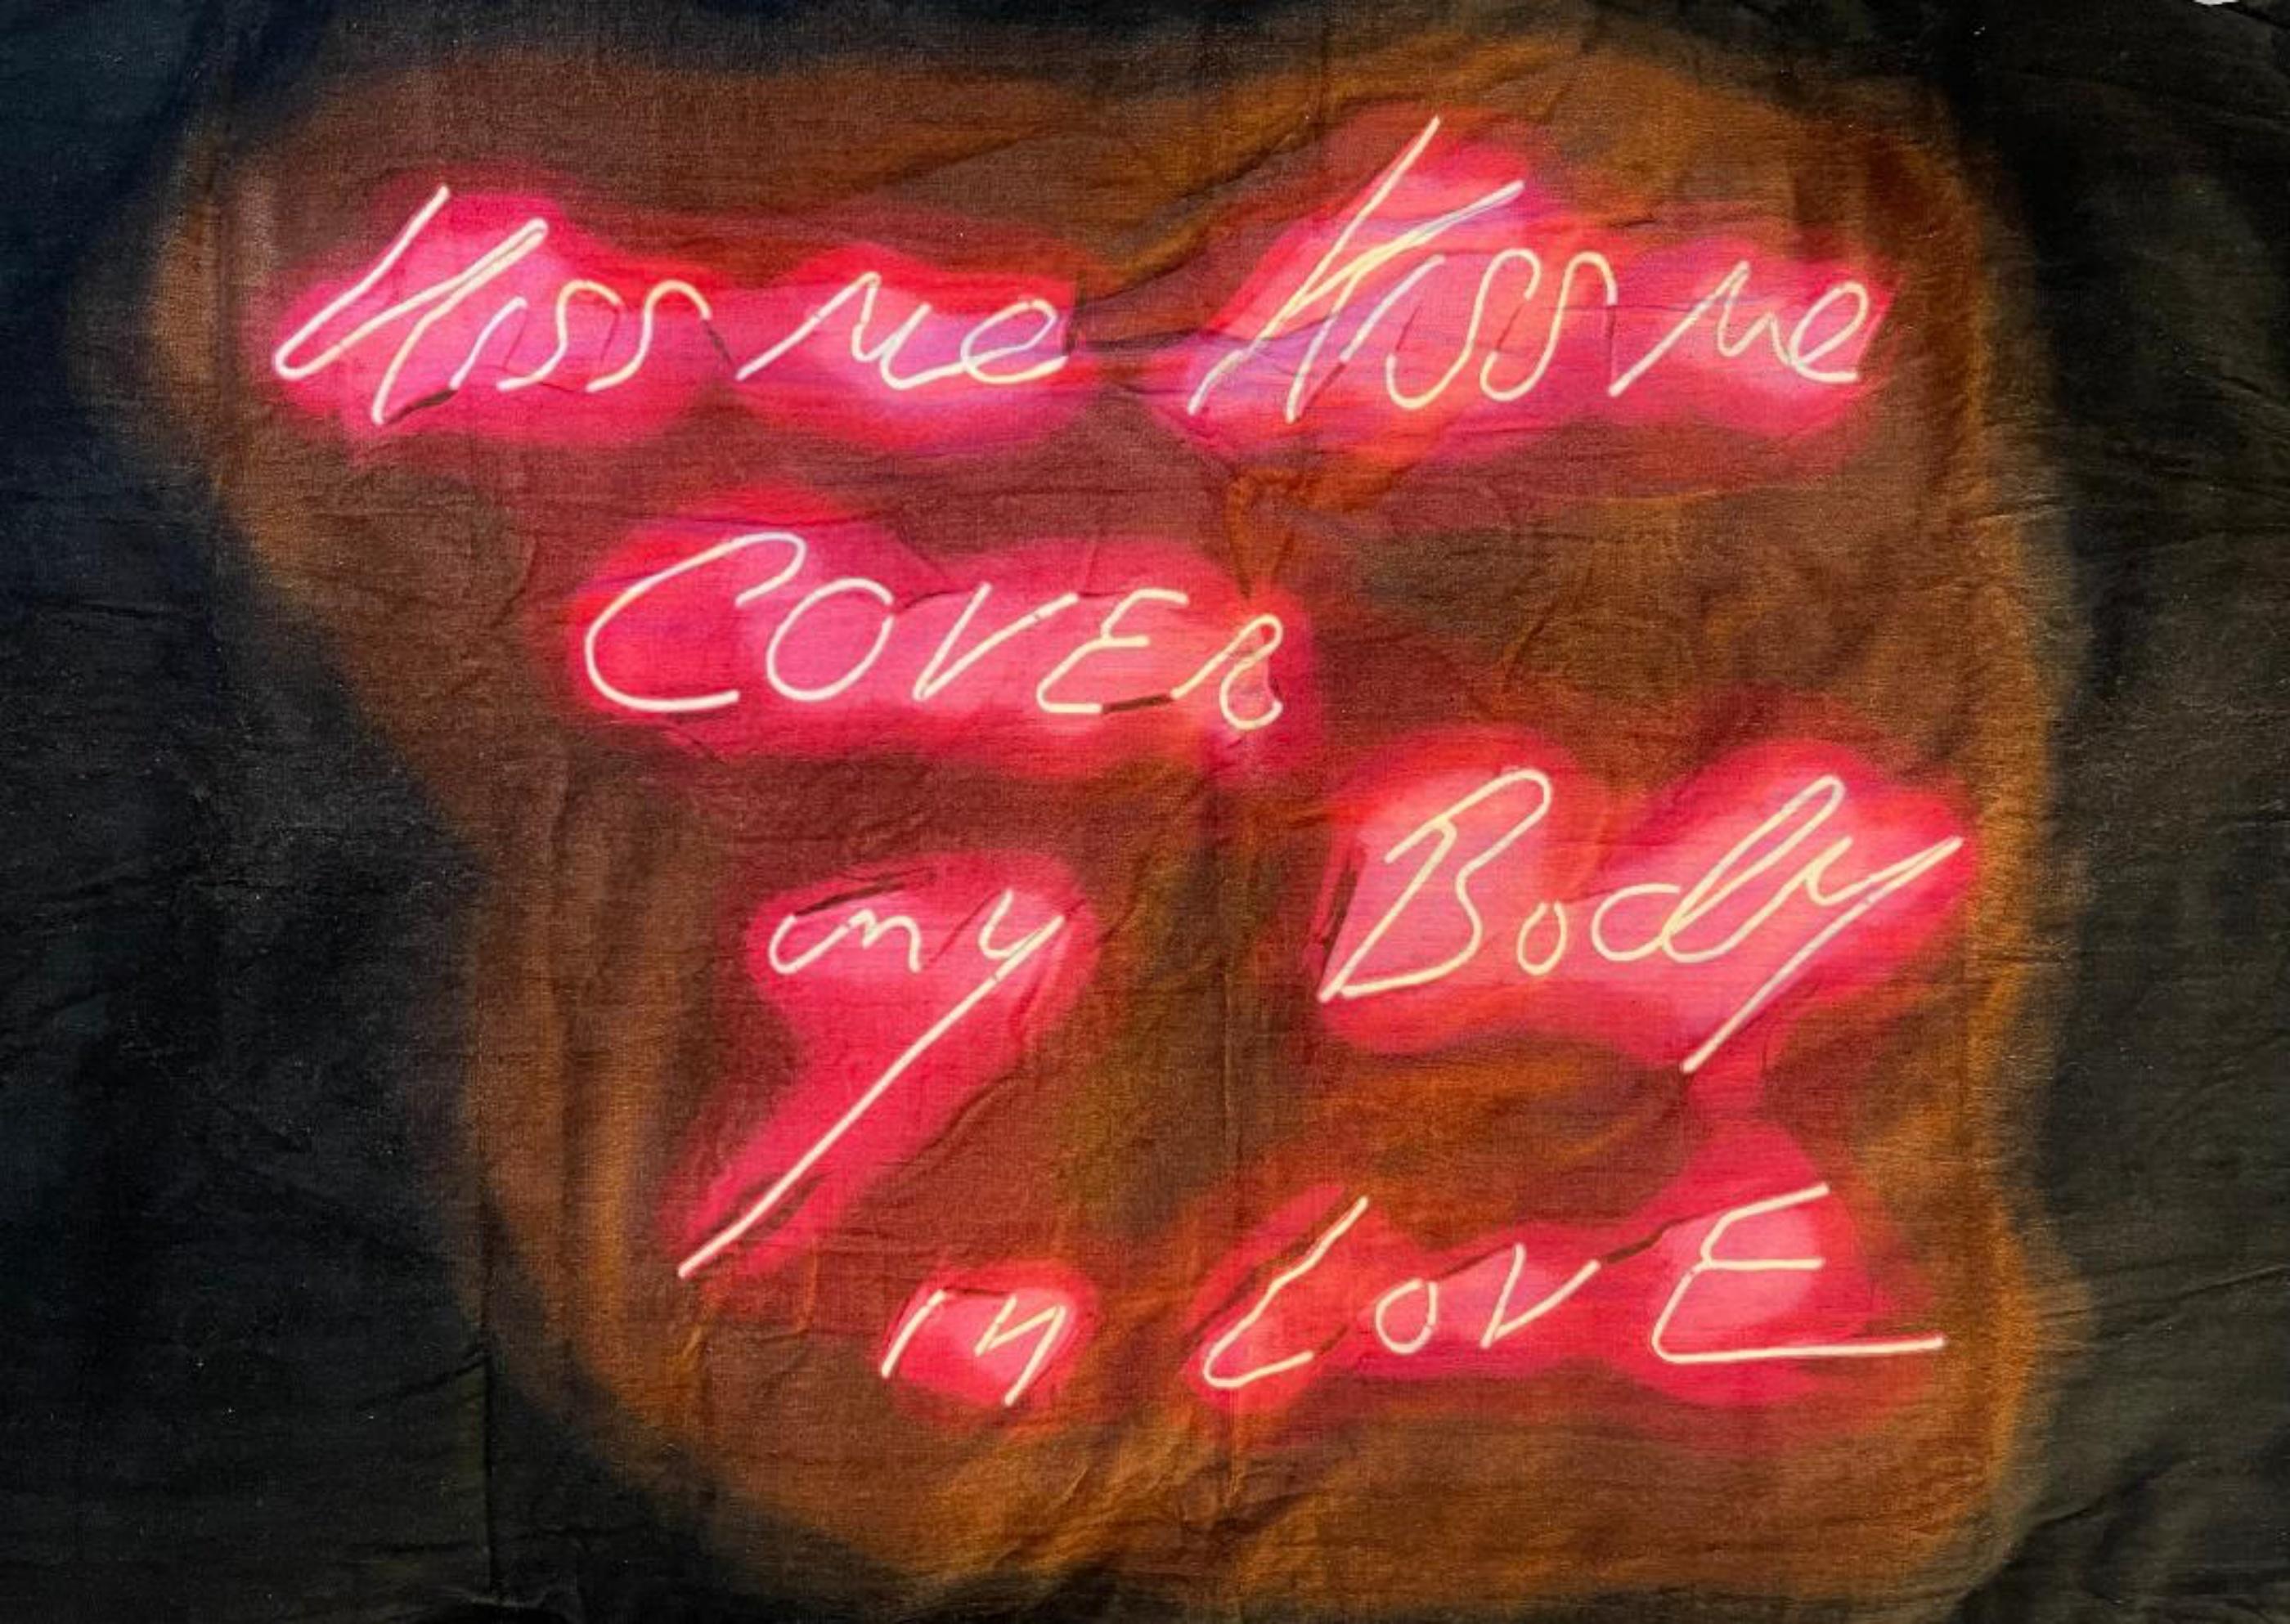 Kiss Me, Kiss Me, Towel (limited edition, hand numbered wrapped in official COA) - Mixed Media Art by Tracey Emin